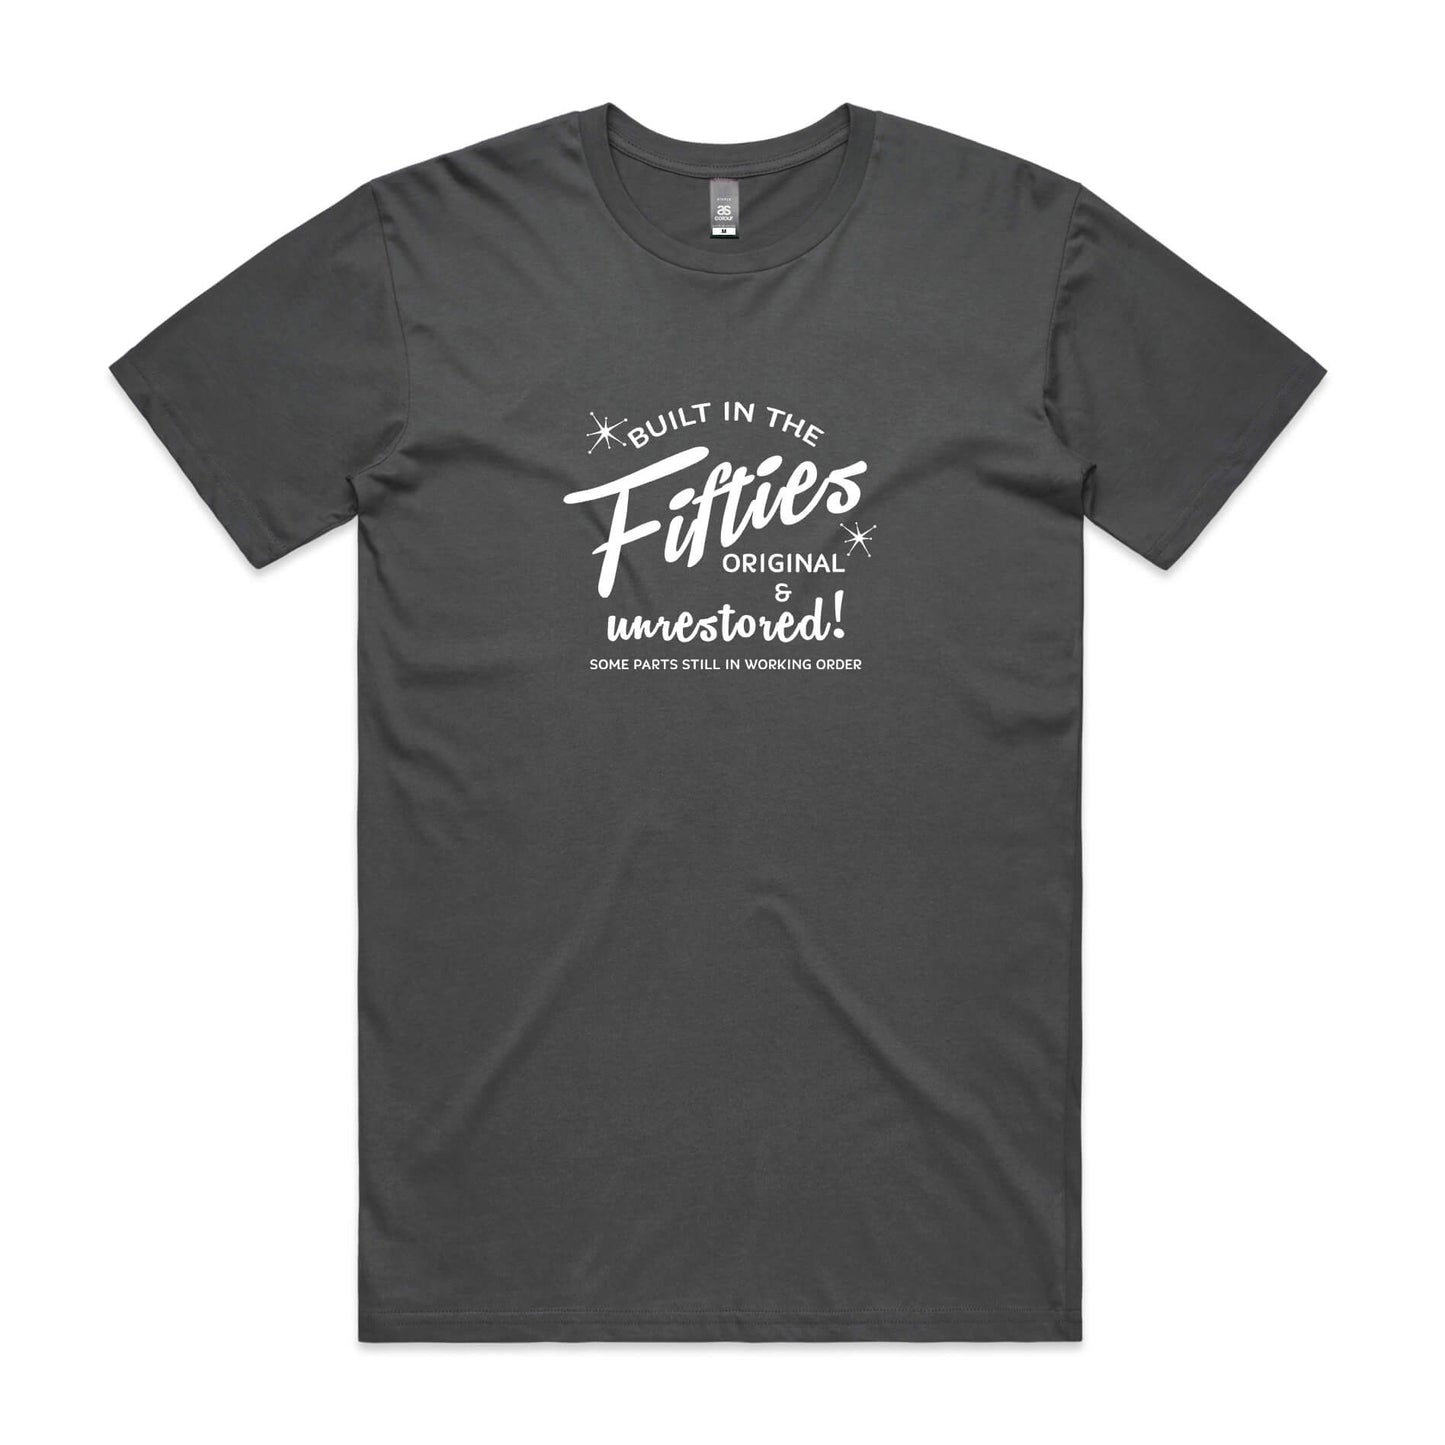 Built in the Fifties t-shirt in charcoal grey with white slogan print